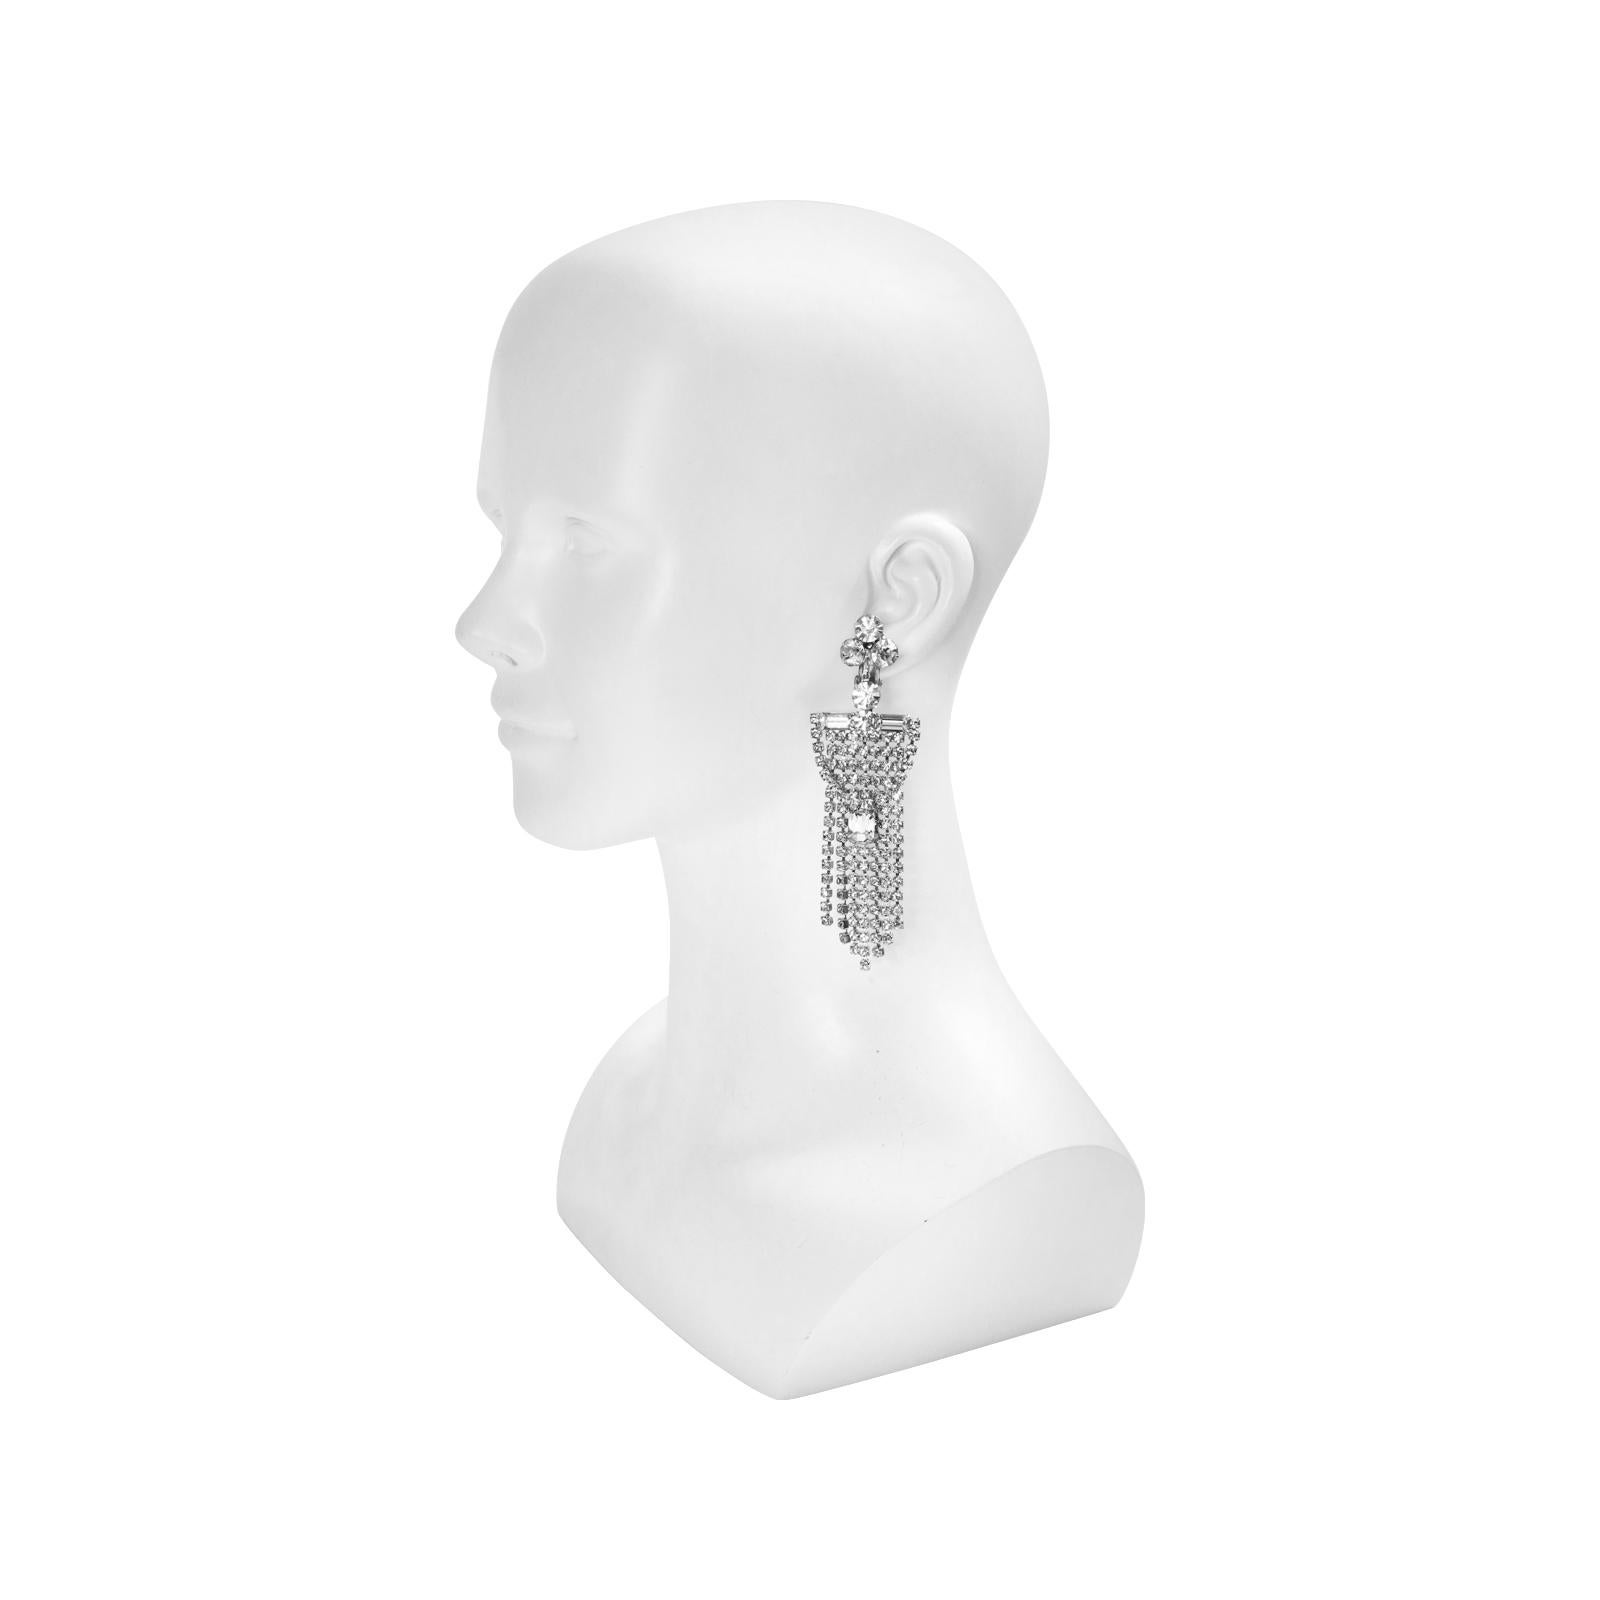 Vintage Diamante Fringe Waterfall Earrings. These dangle from three round stones and have a piece of draped fringe with an emerald shaped stone in the middle. Looks great with a t shirt or for a night out. Clip On.

These really are gorgeous!